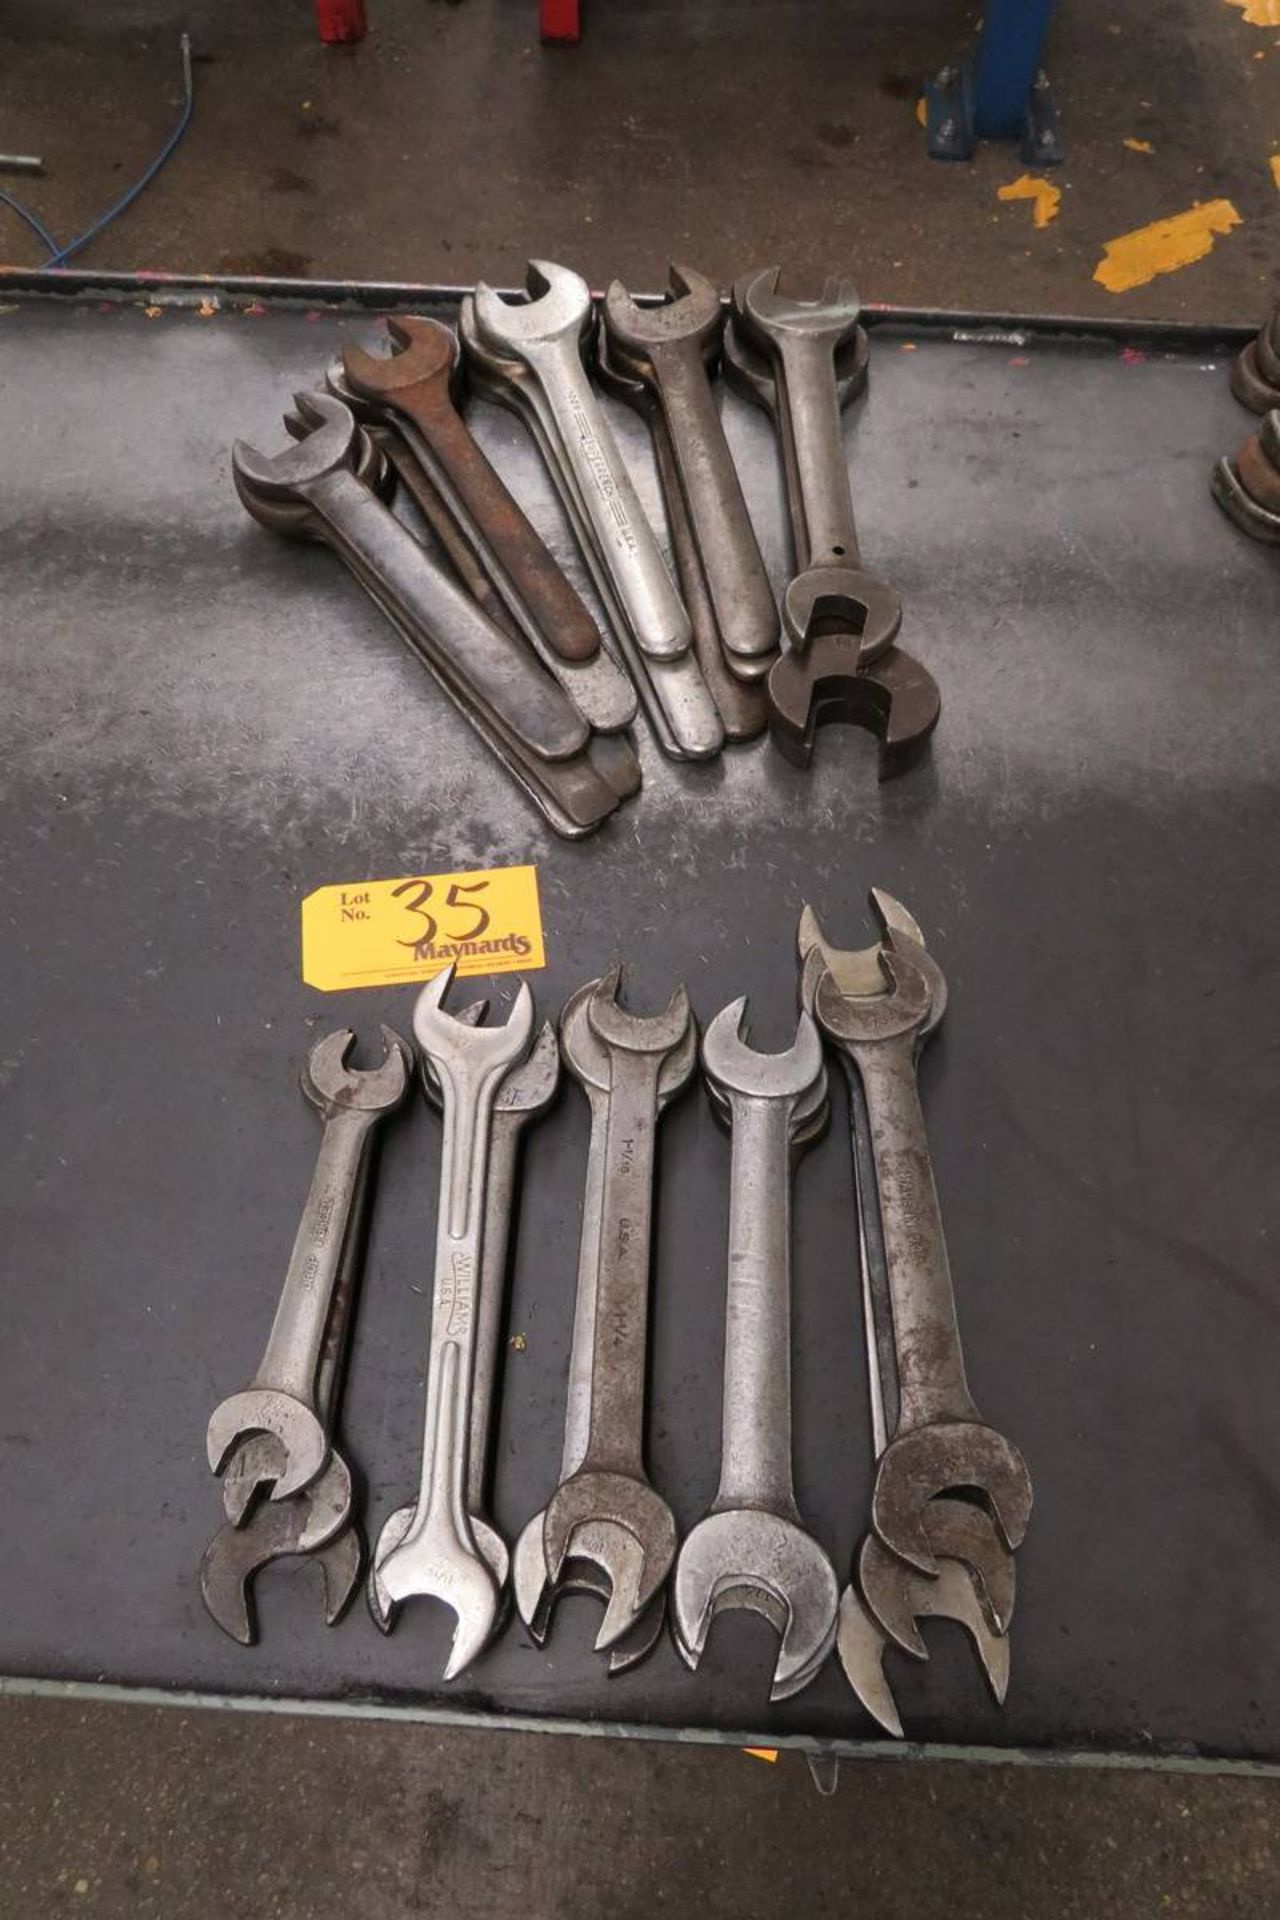 (30) Assorted Wrenches